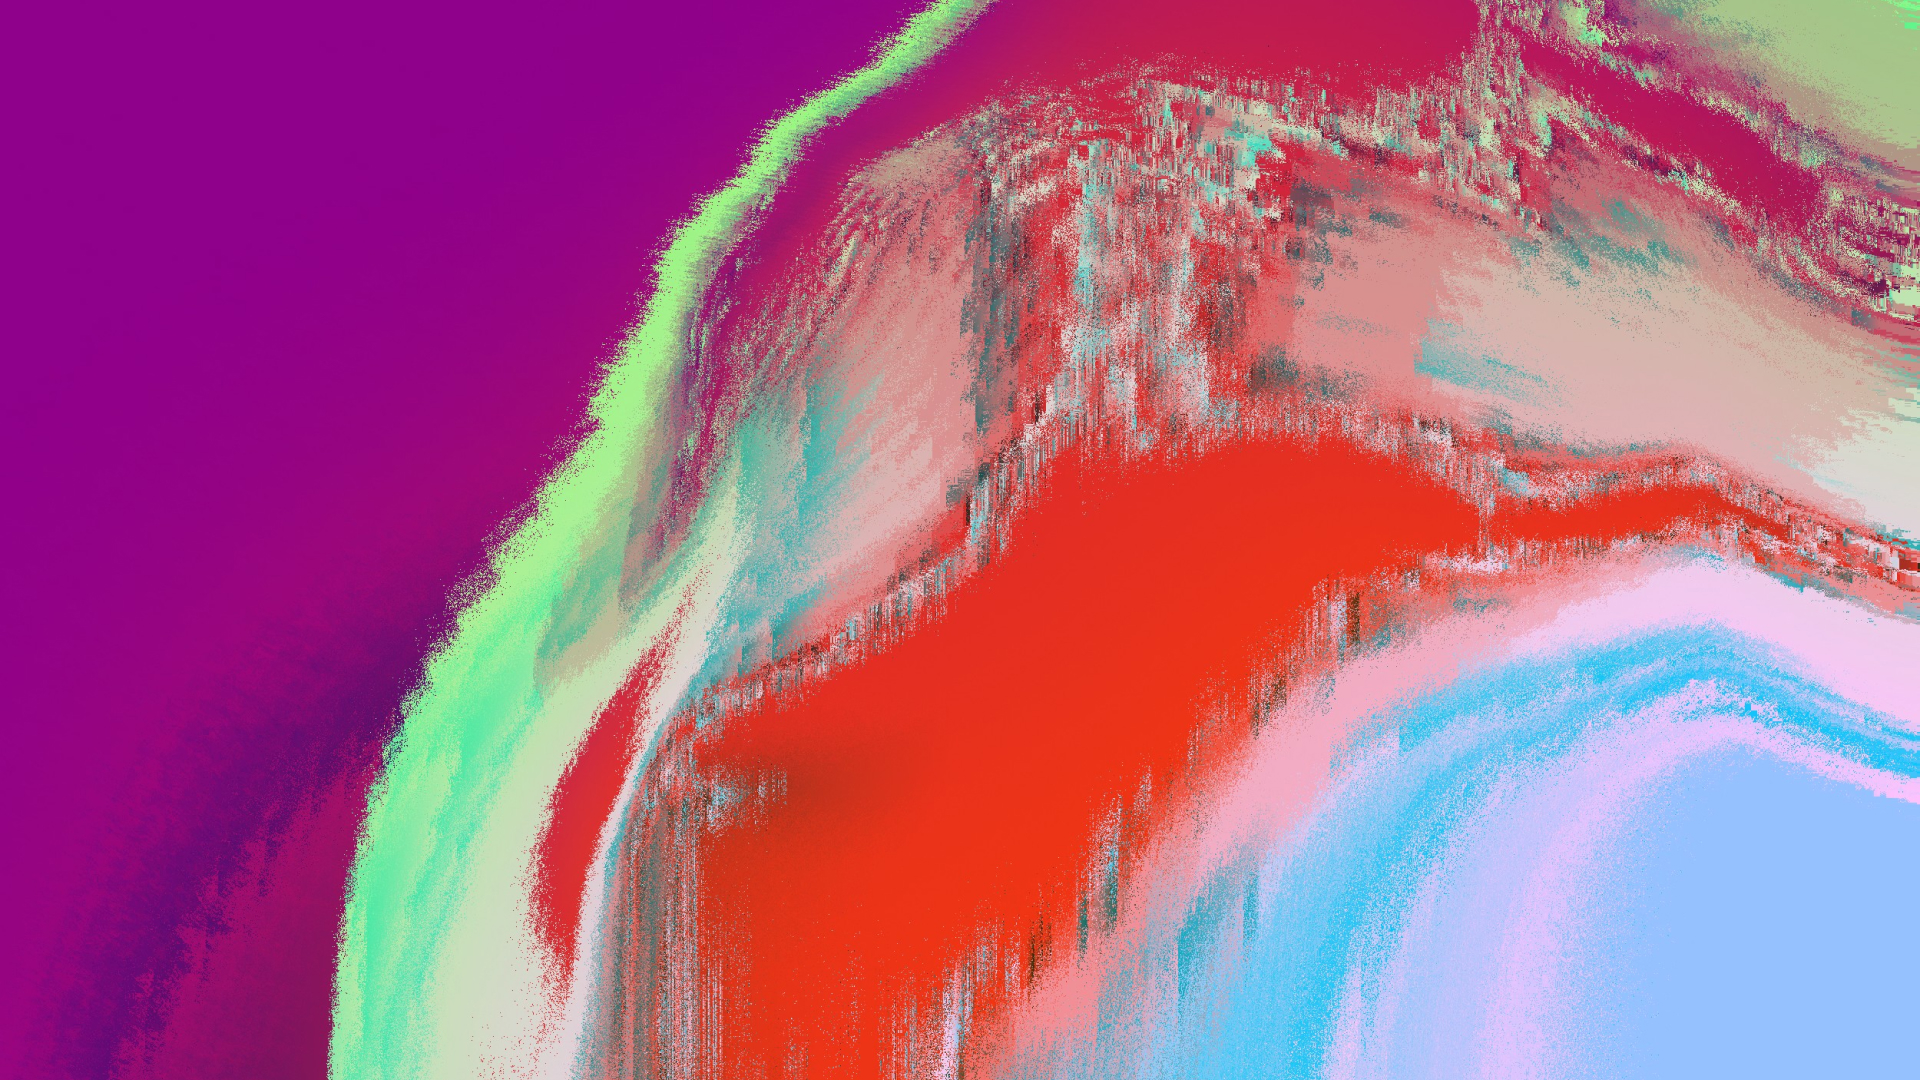 Image generated with Processing — glitch effect on my brand image using code by Tomasz Sulej.